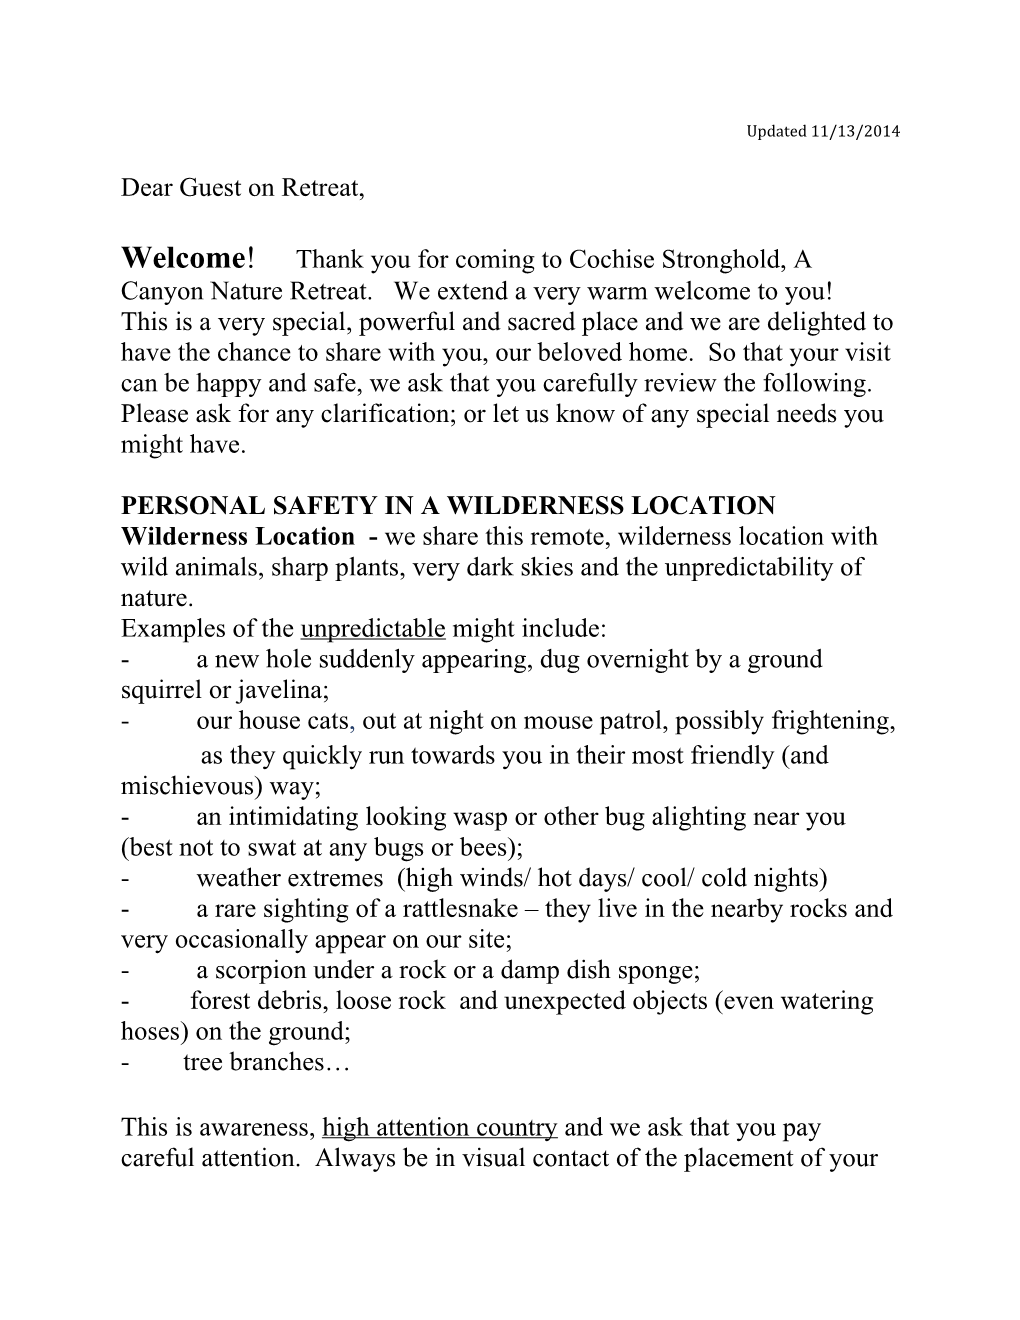 Personal Safety in a Wilderness Location